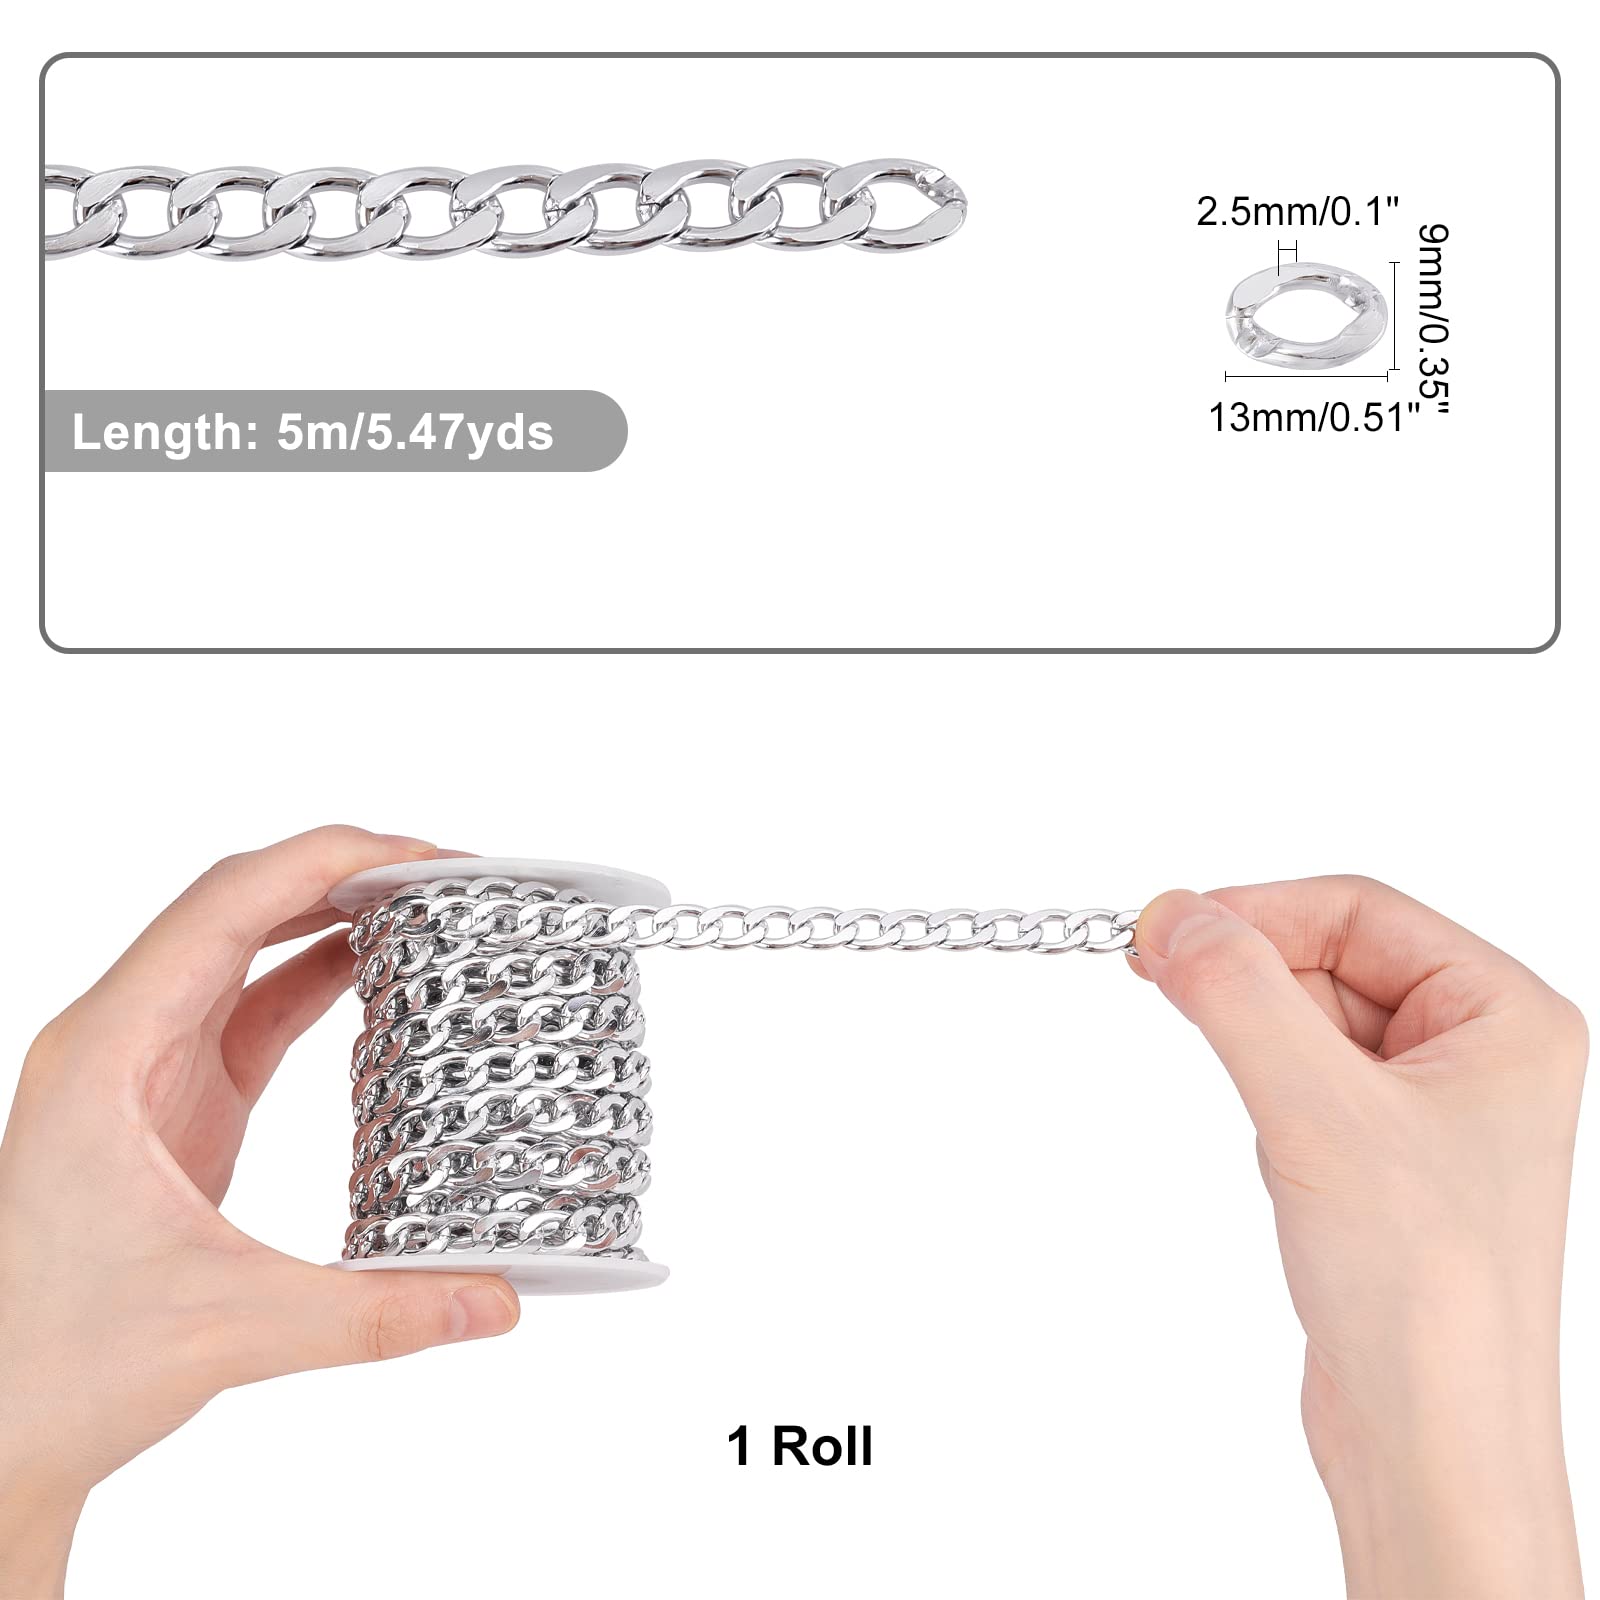 CHGCRAFT 16.4 Feet Aluminium Curb Chains Smooth Surface Charm Twisted Link Chains with Spool Silver Color Chains for DIY Necklace Bracelet Jewelry Making Chain, 0.5x0.35x0.1inch Link